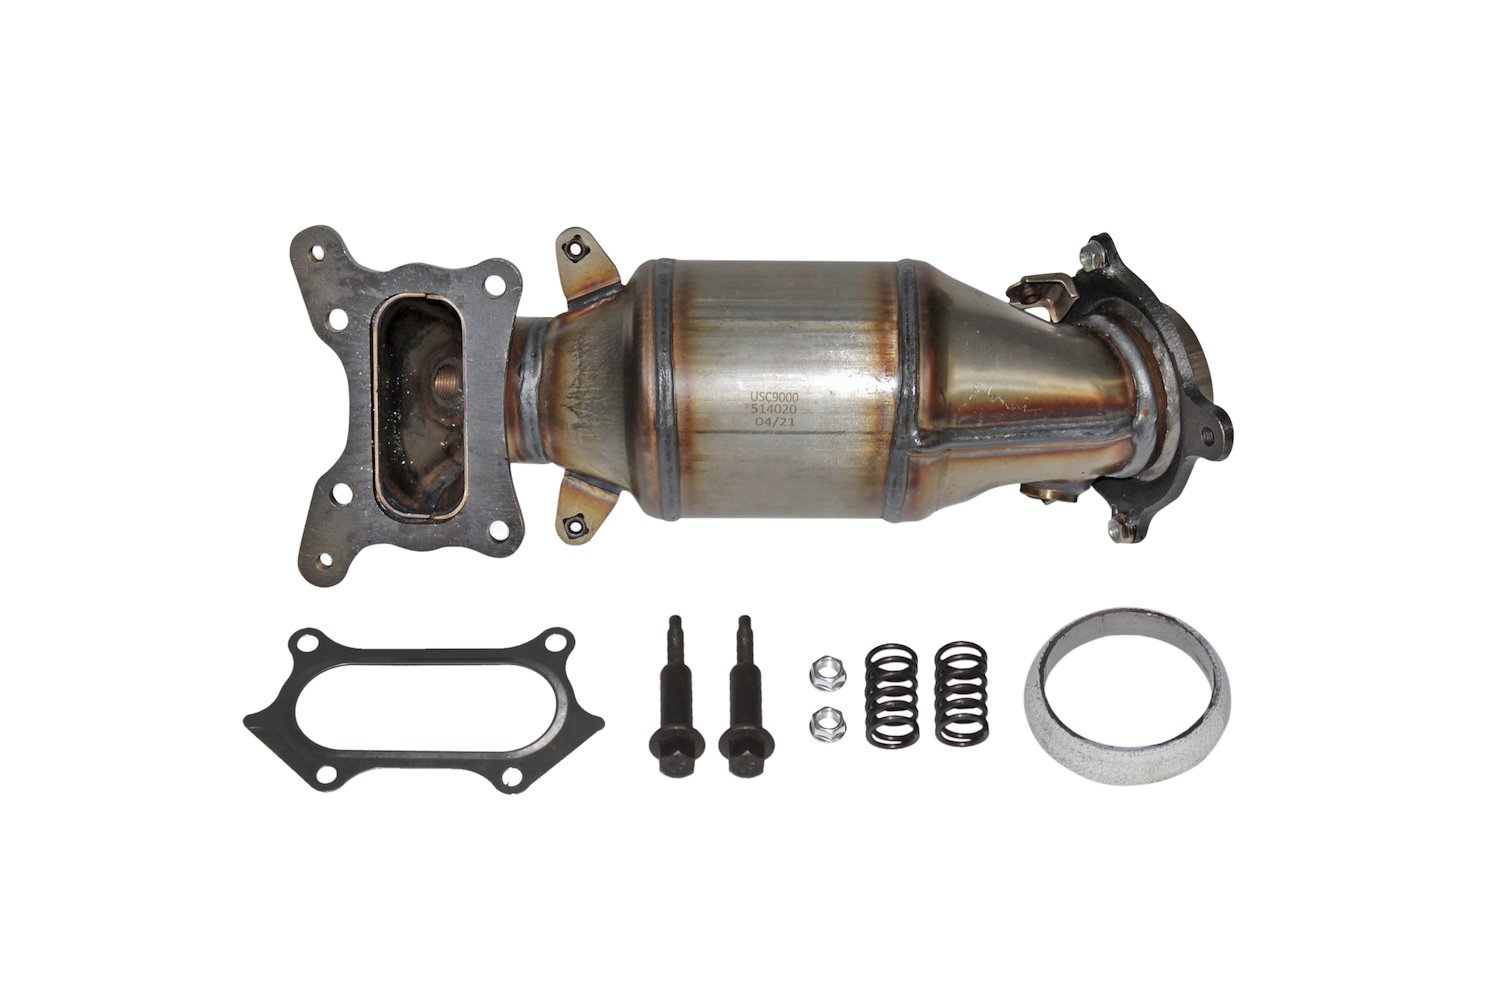 Catalytic Converter Fits 2009-2014 Acura TSX, 2008-2010 Honda Accord w/2.4L 4 cyl. Eng. [Front]